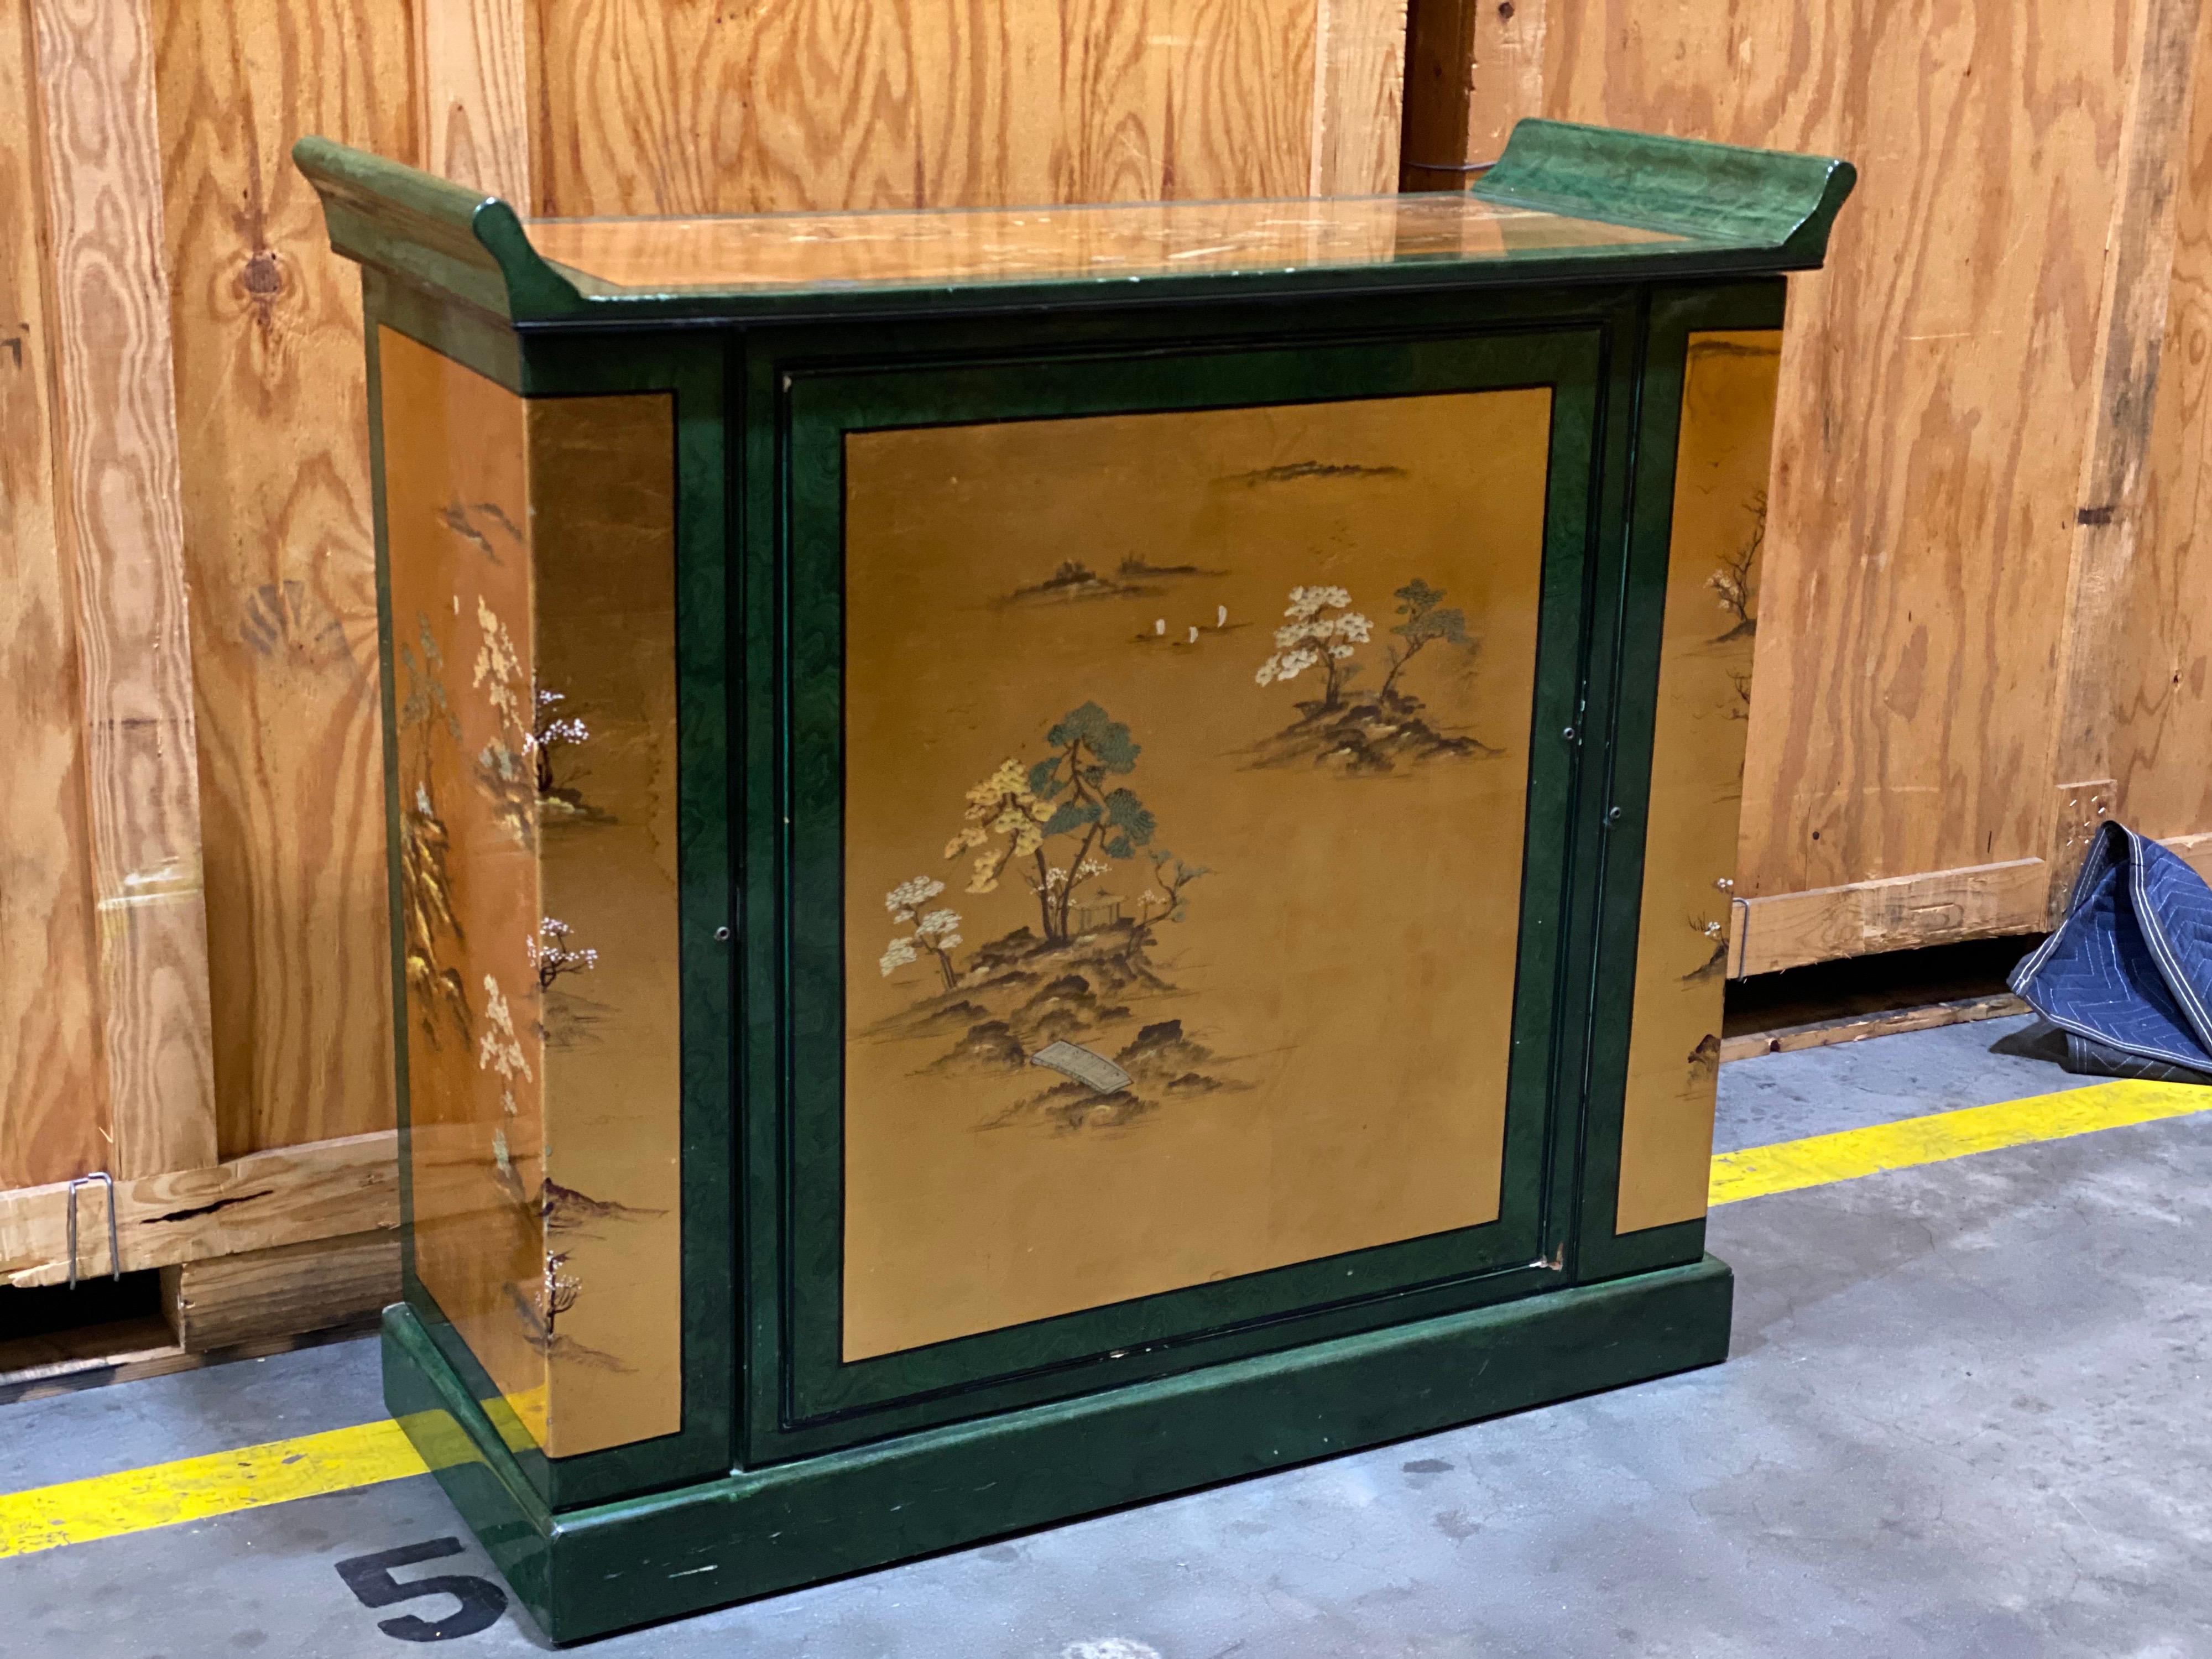 Japanese Malachite Green & Gilded Chinoiserie Faux painted bar cabinet
A fabulous looking piece with a very useful inside!
Center section rotates 360 degrees and has place for a full bar.
Right section has holders for 18 glasses
Left section has